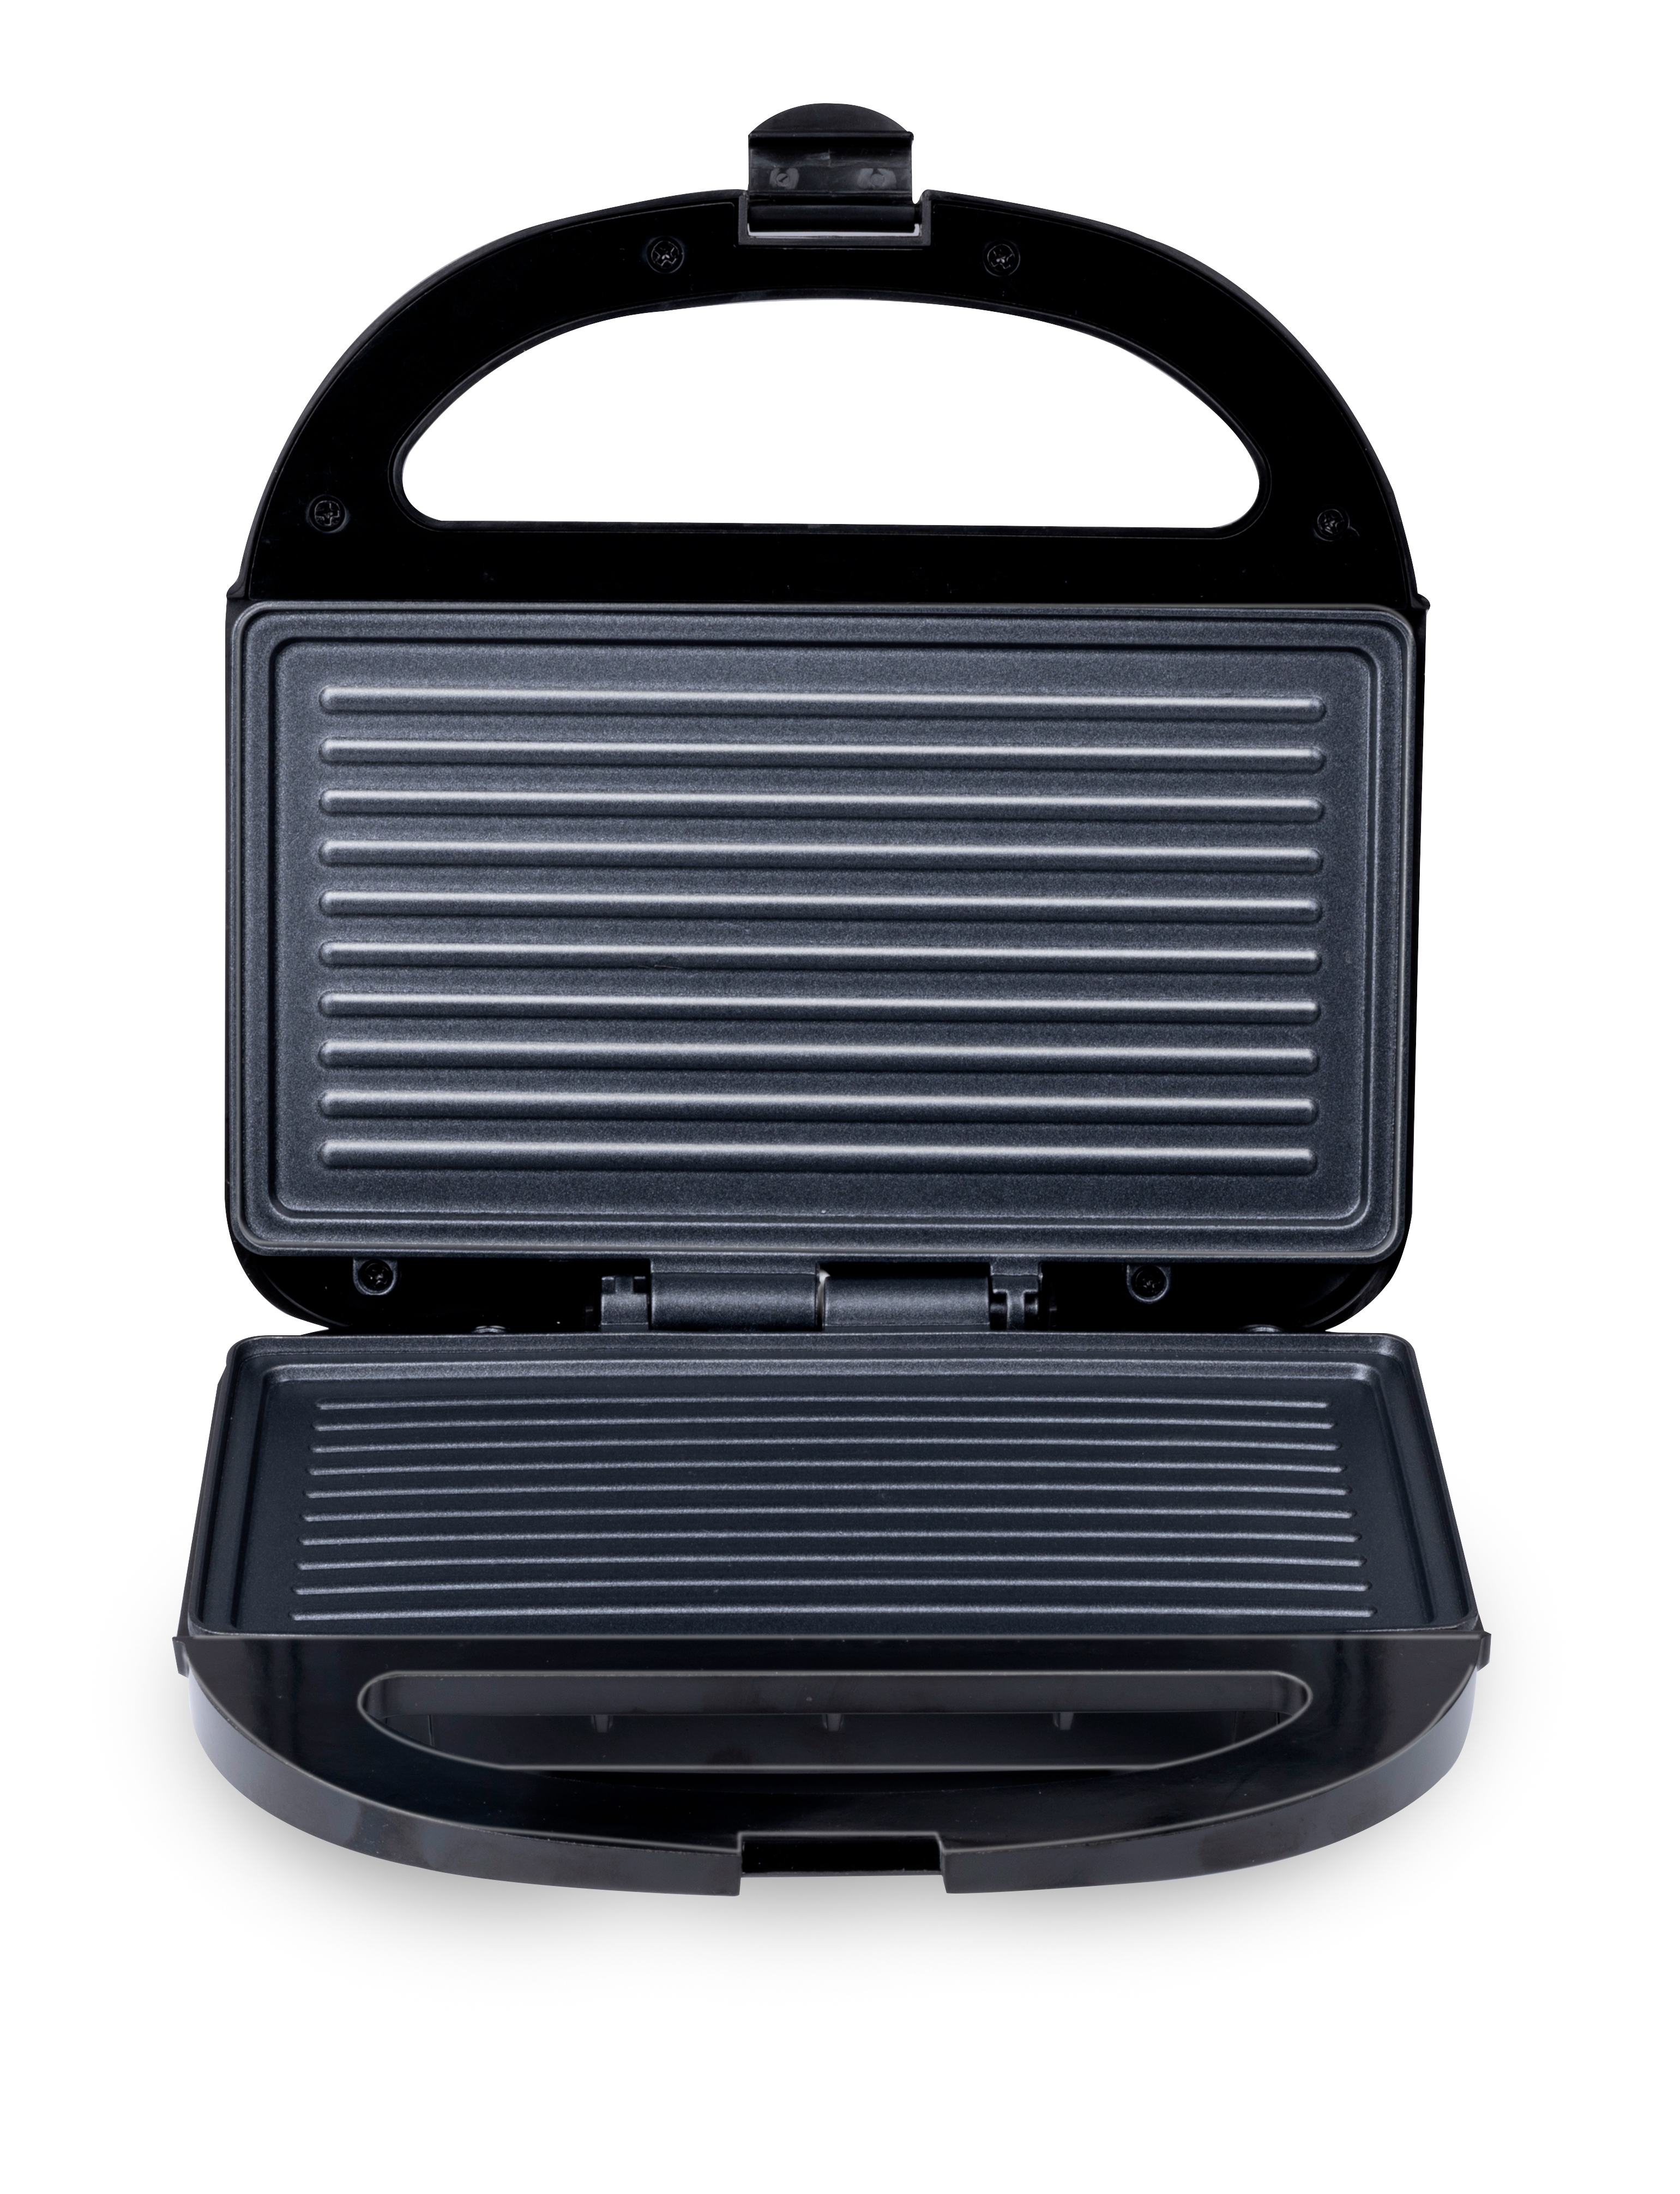 Contactgrill 750 W